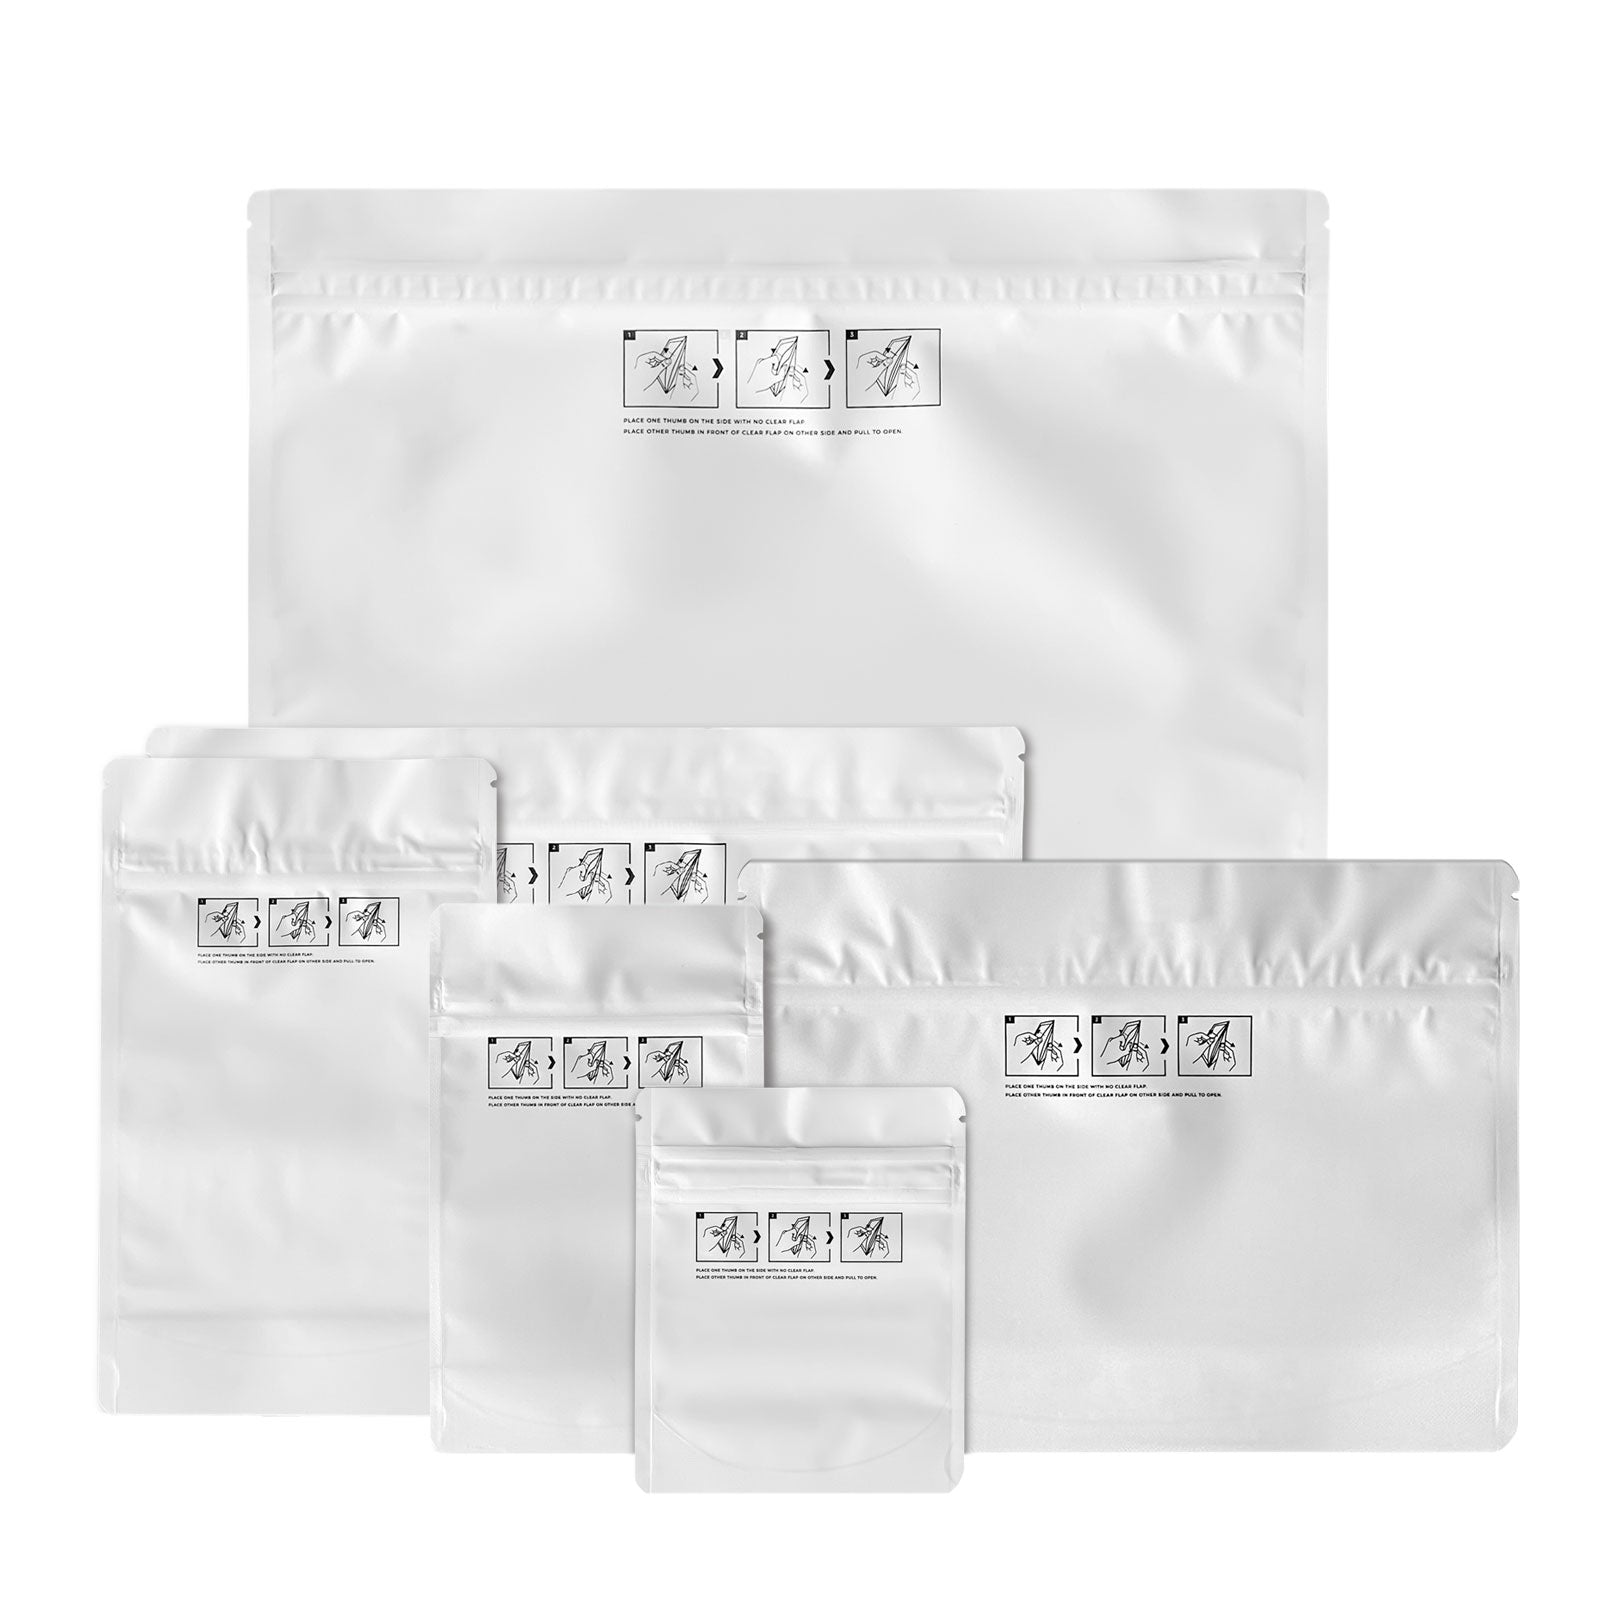 12"x9" Large Child Resistant Exit Bags All White - 500 Count